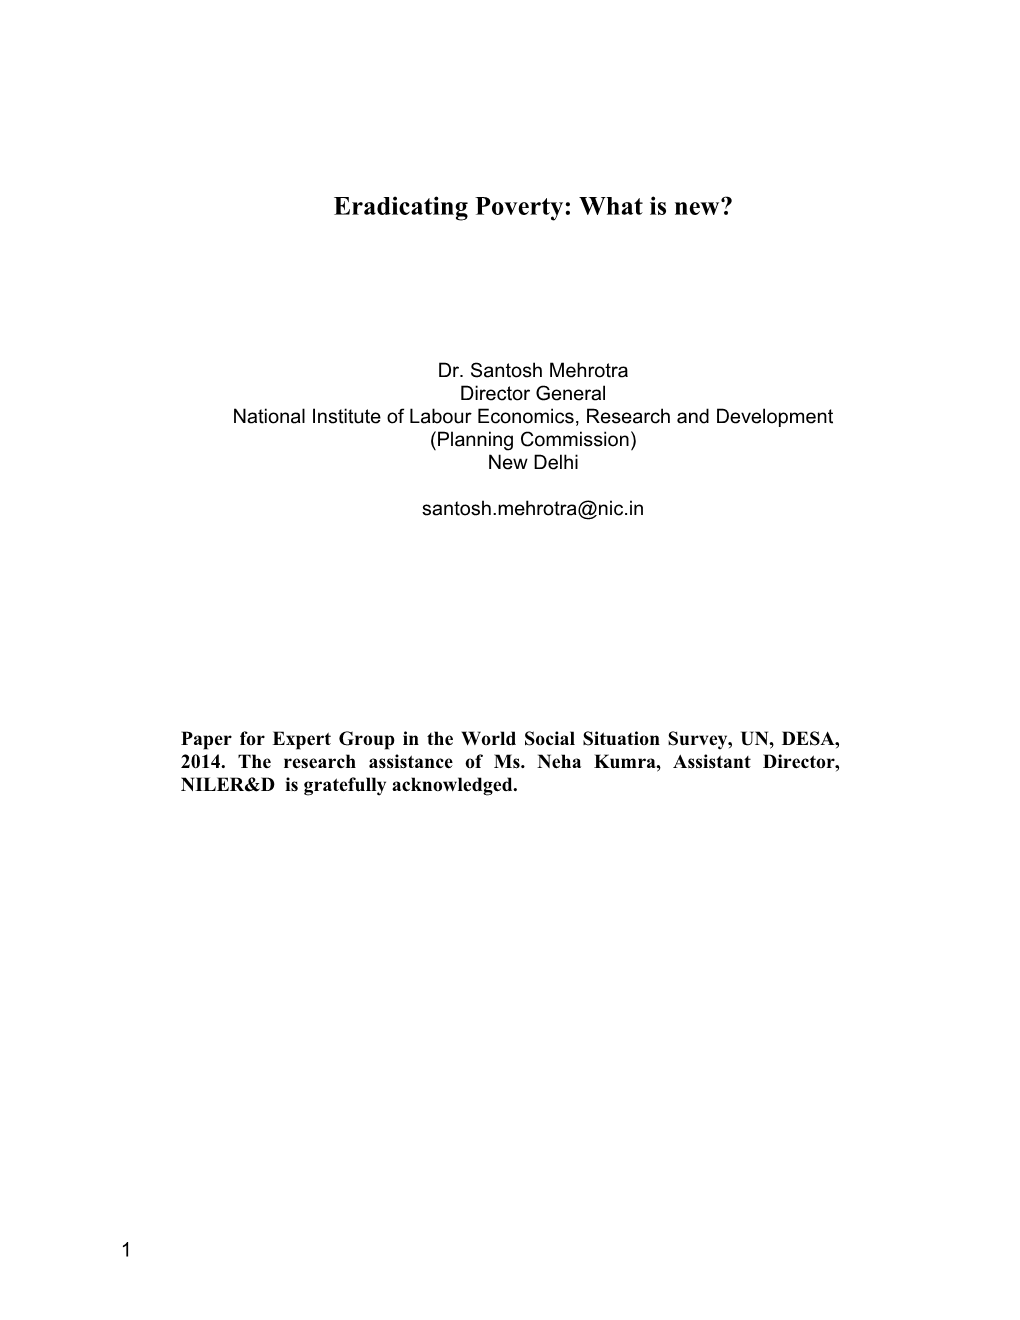 Eradicating Poverty: What Is New?